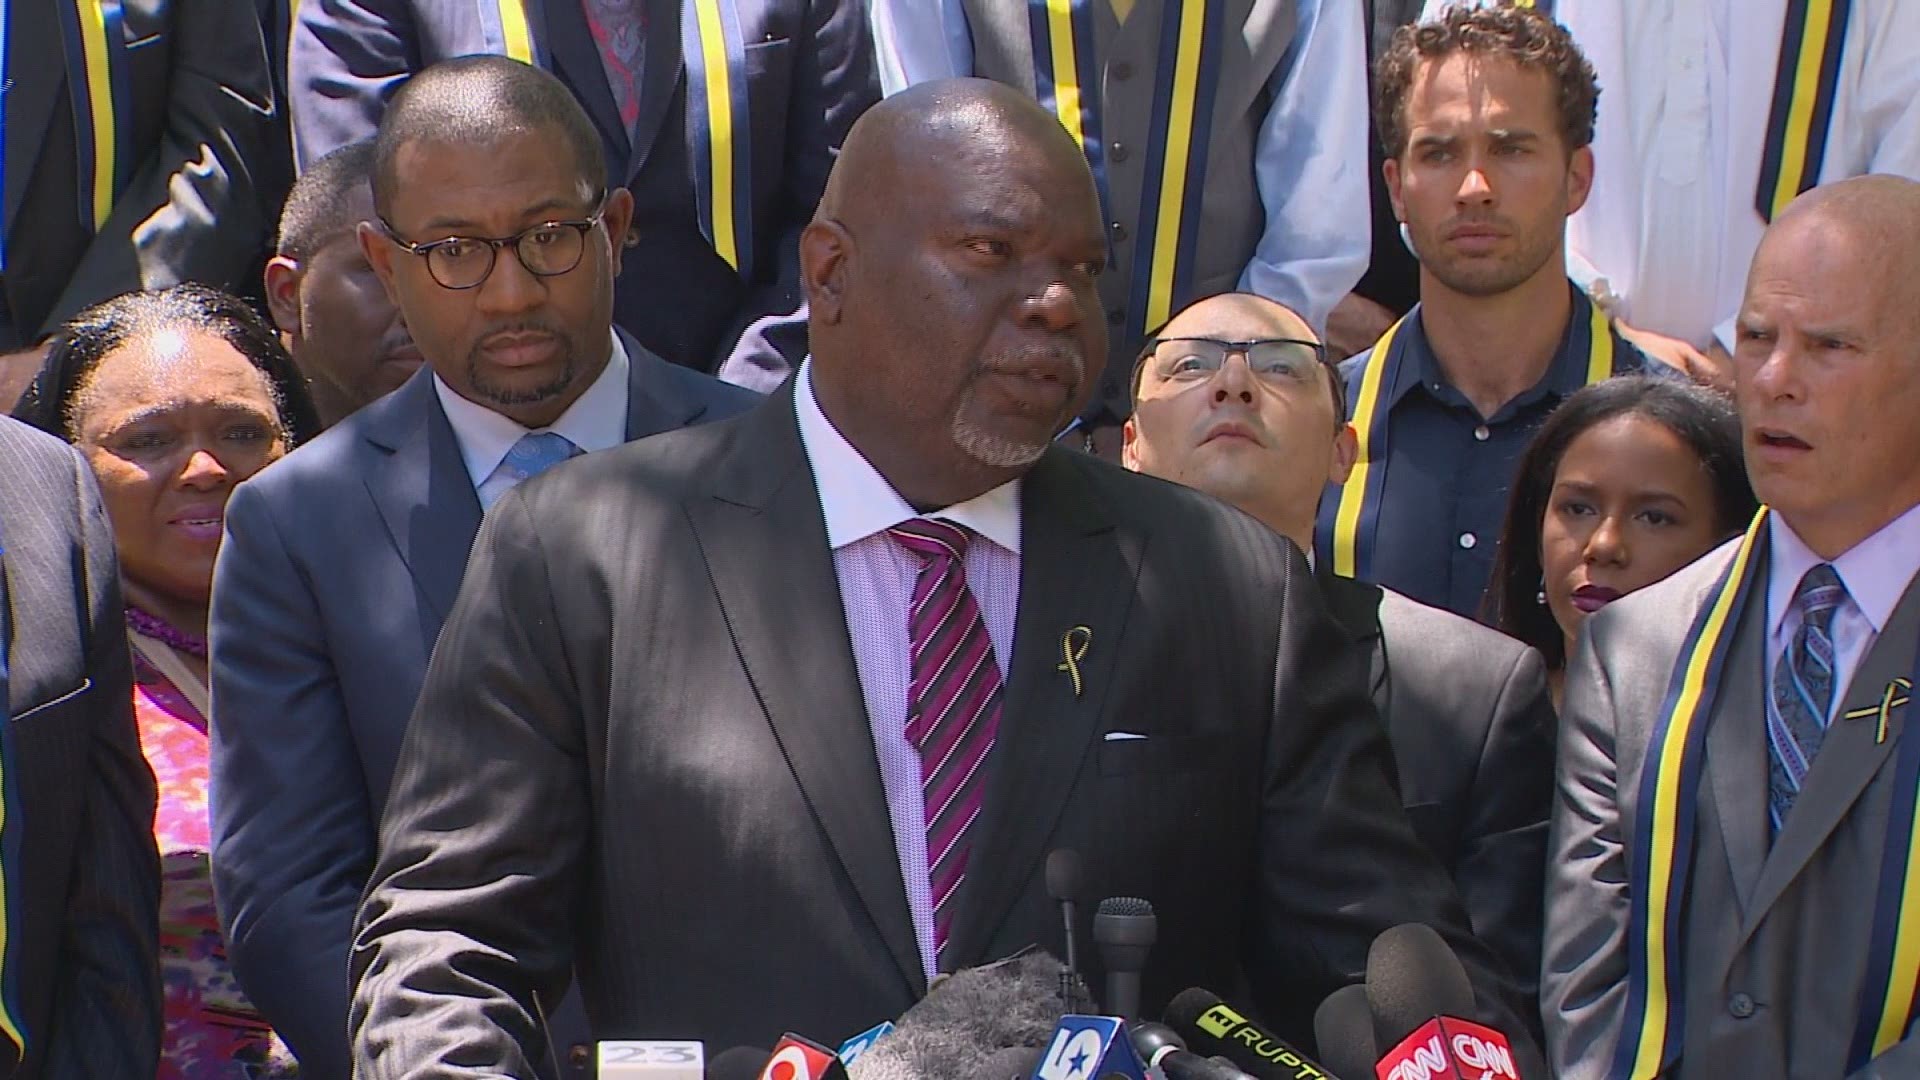 Dallas preacher TD Jakes speaks about Thursday's police shootings